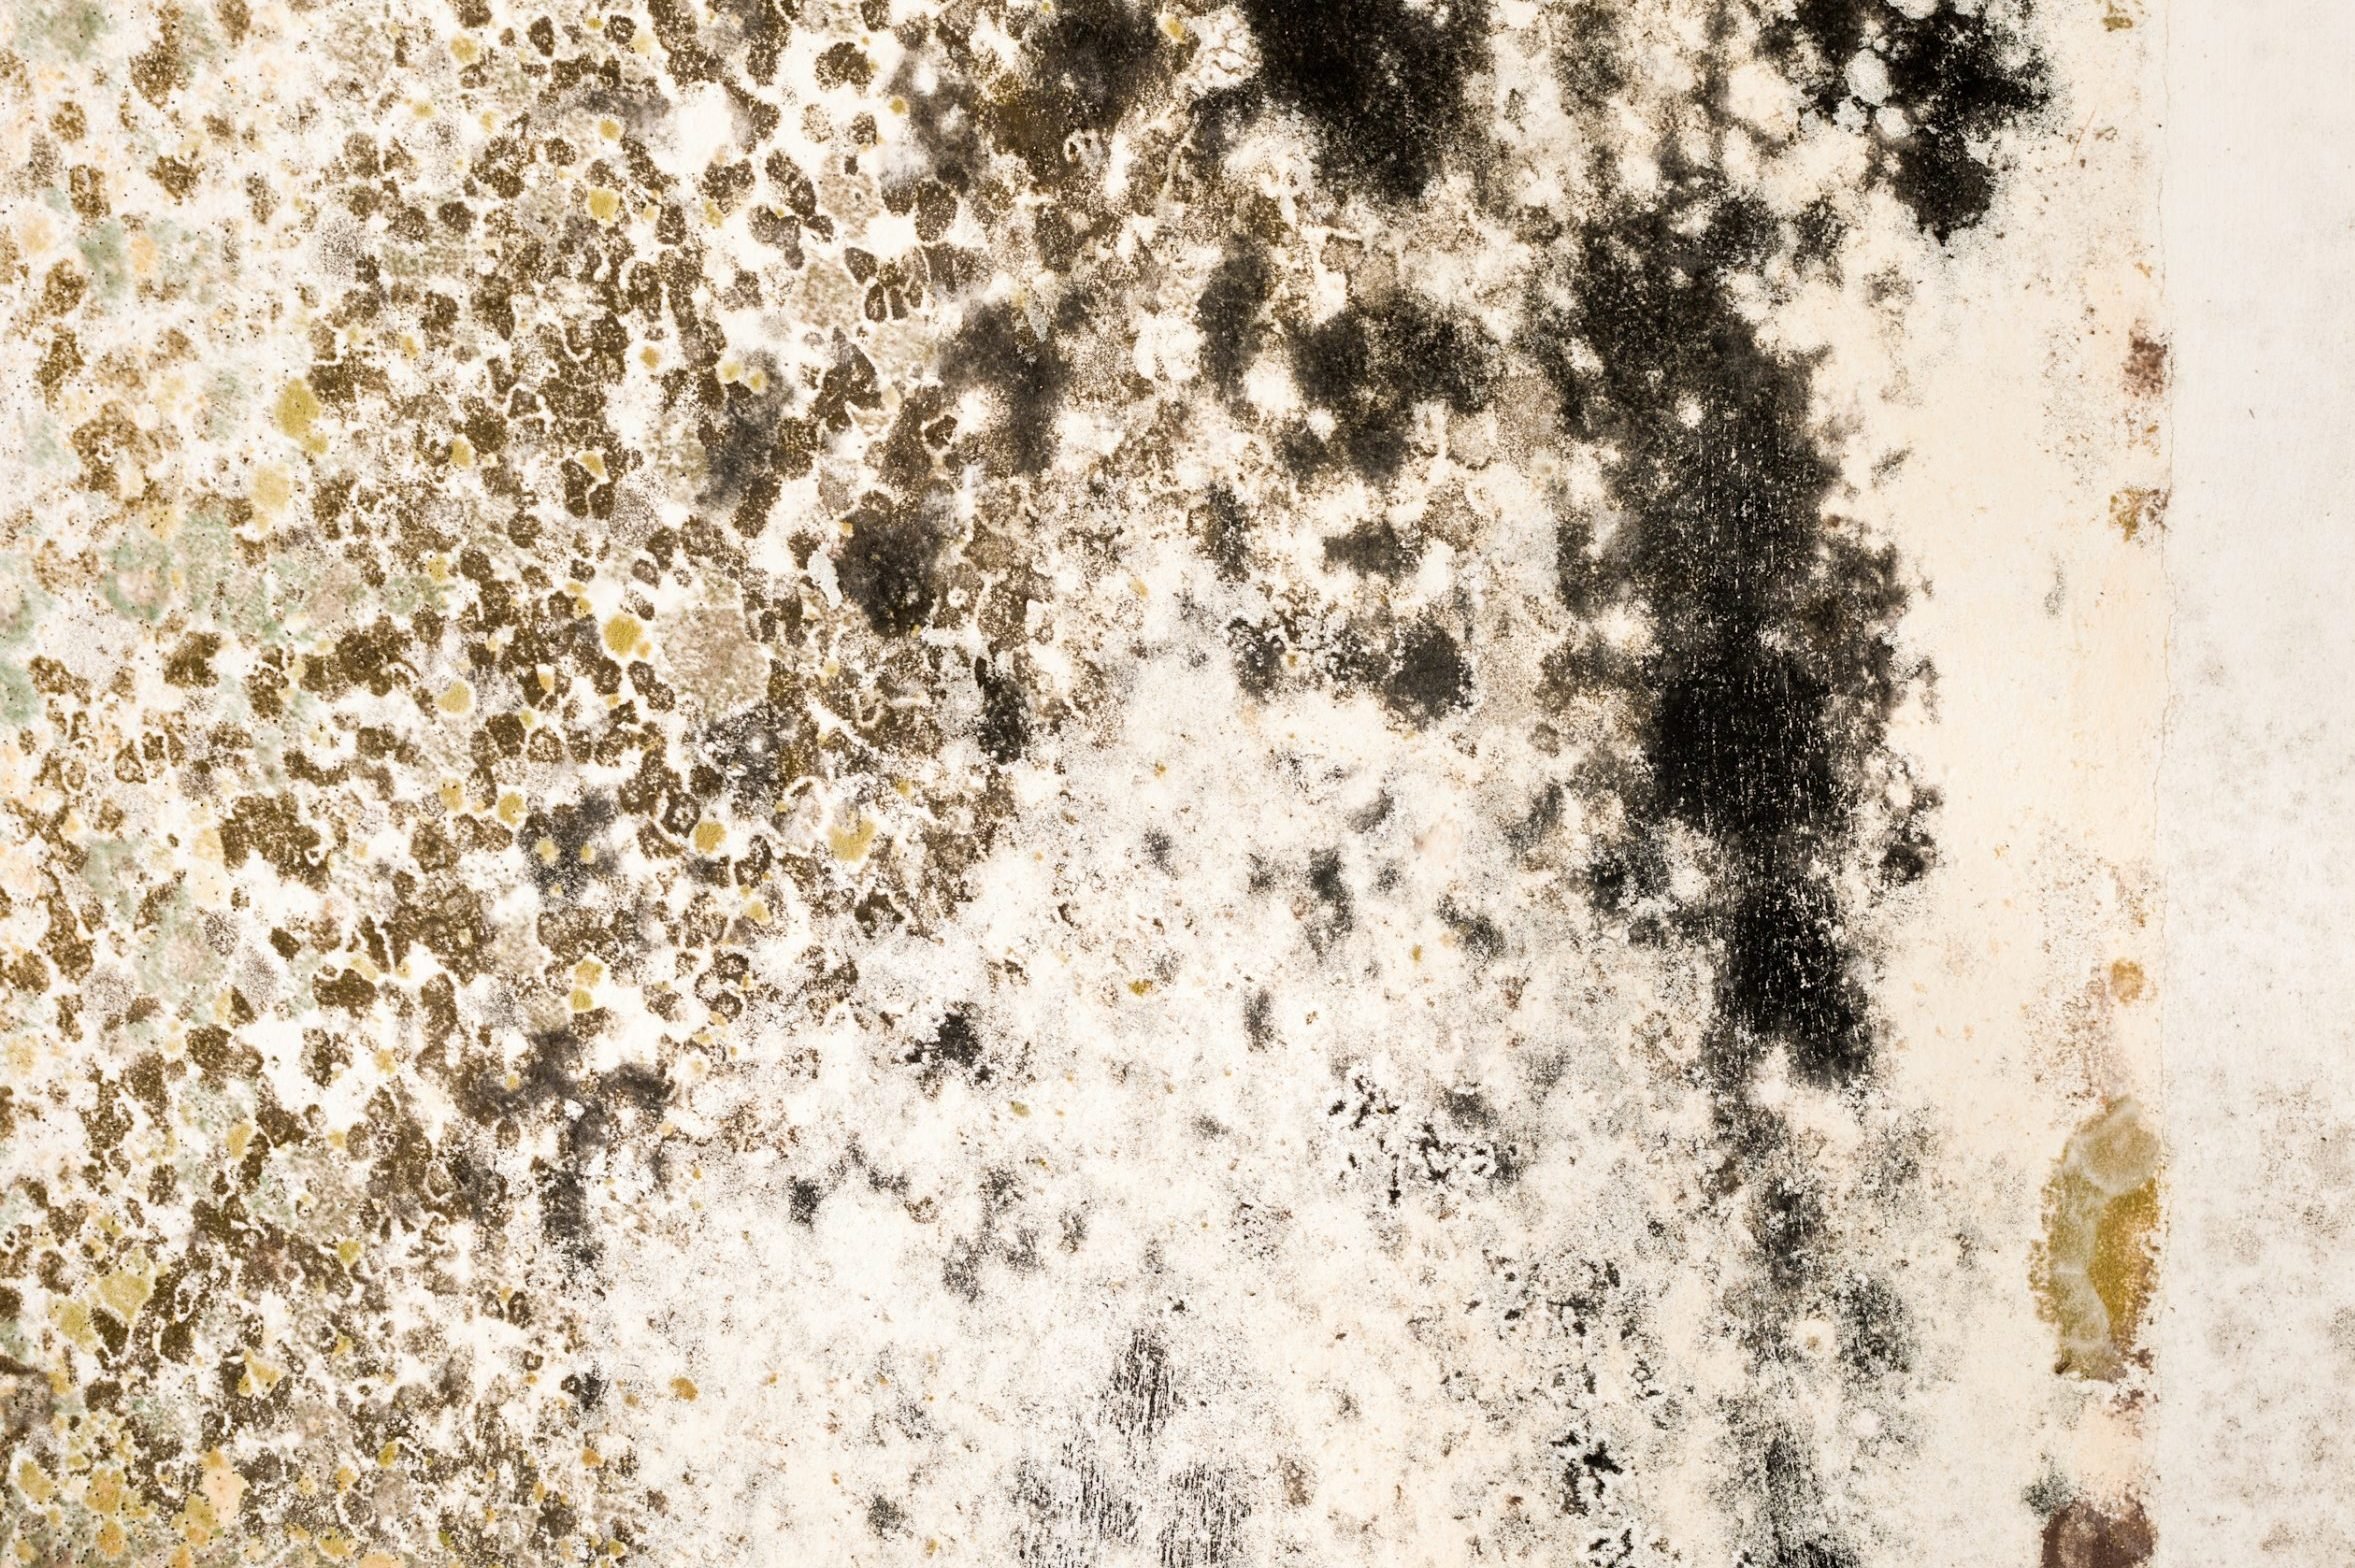 What's the Difference Between Mold and Mildew?